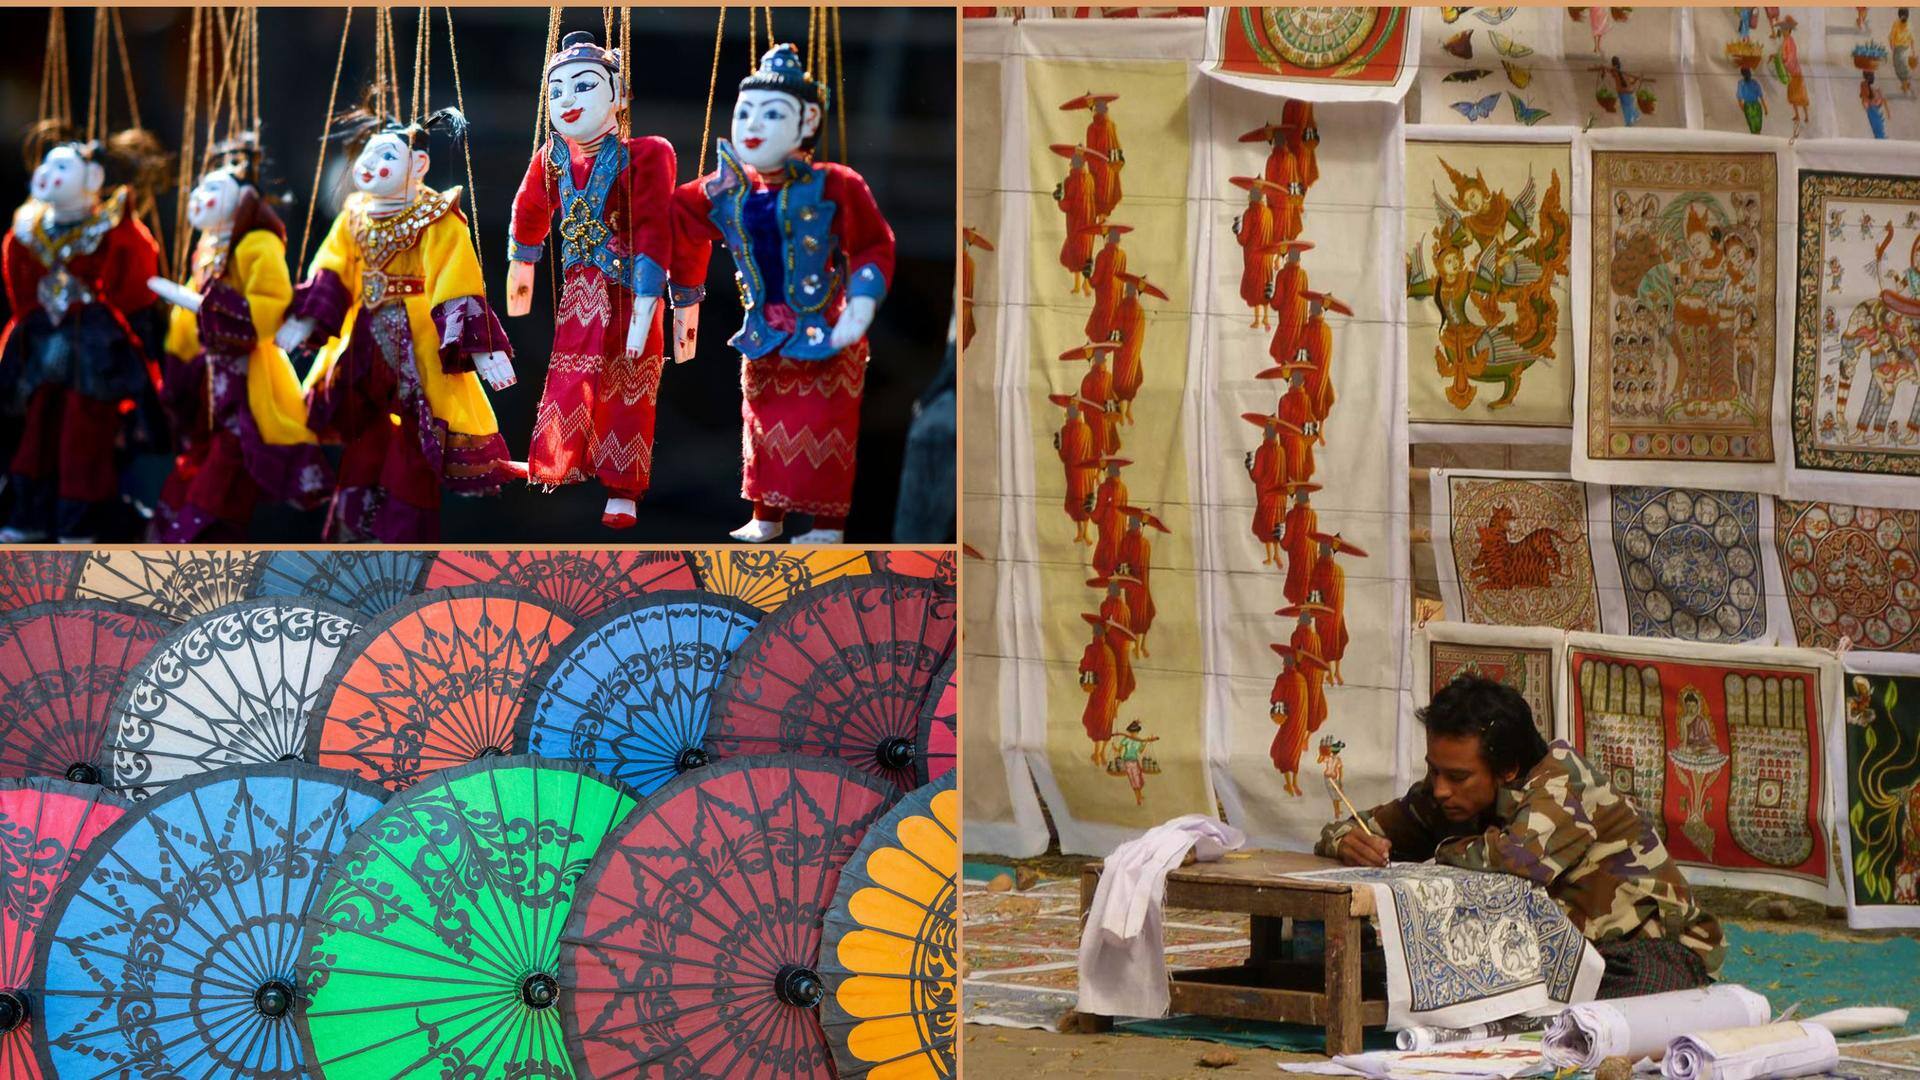 Traveling to Myanmar? Include these souvenirs in your shopping list